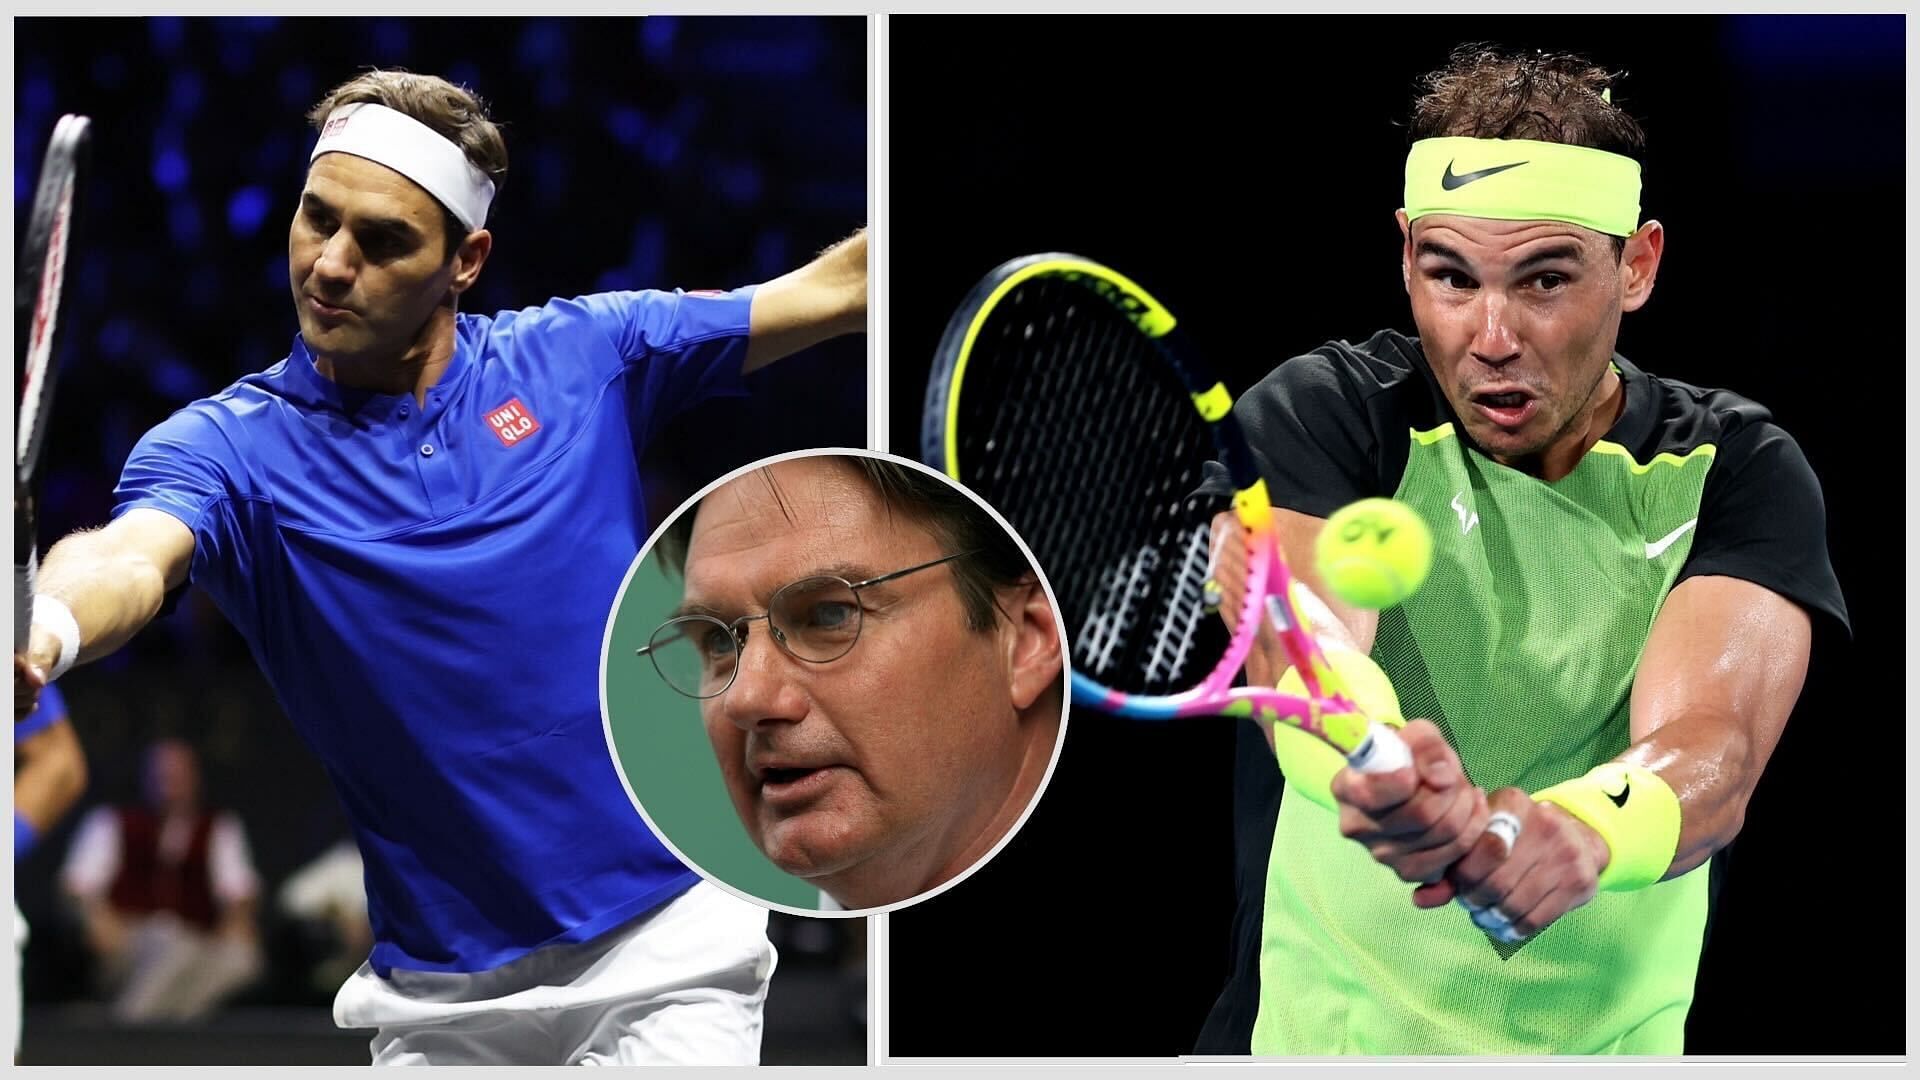 Jimmy Connors recently drew a parallel to Roger Federer and Rafael Nadal to highlight the challenges of aging in tennis